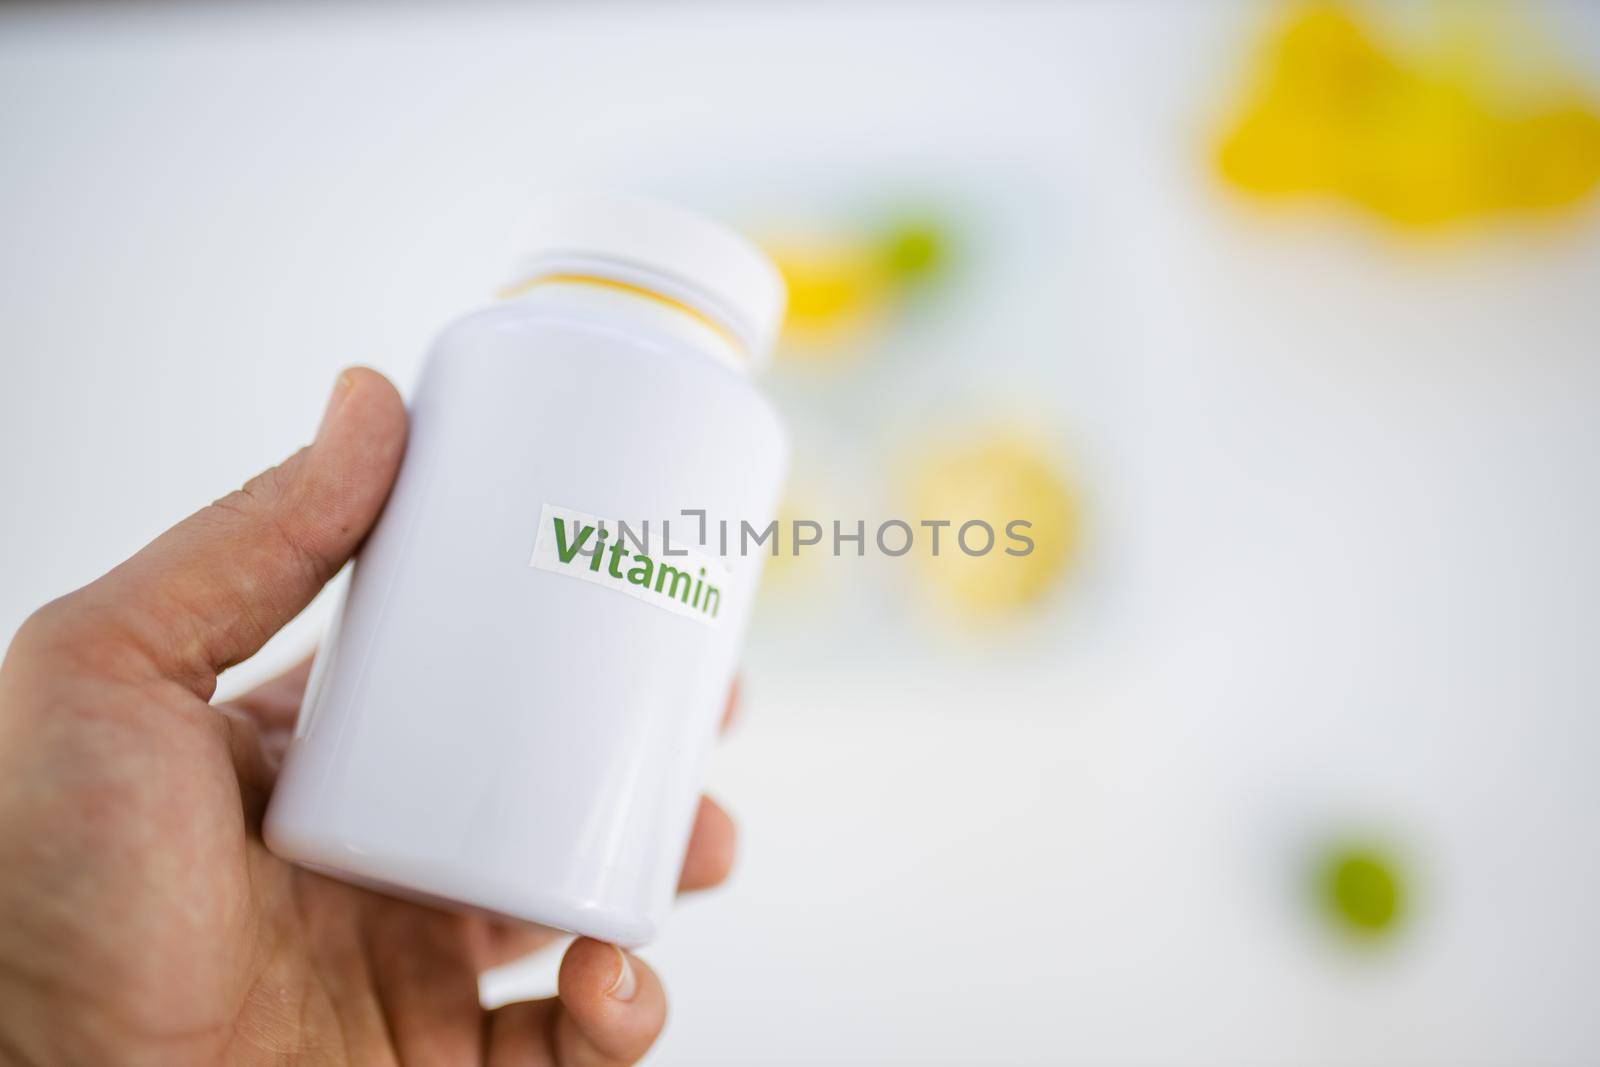 Hand holding plastic bottle of vitamins above blurry lemon and lime slices on white table. Hand holding white supplements bottle. Vitamin C nutrition